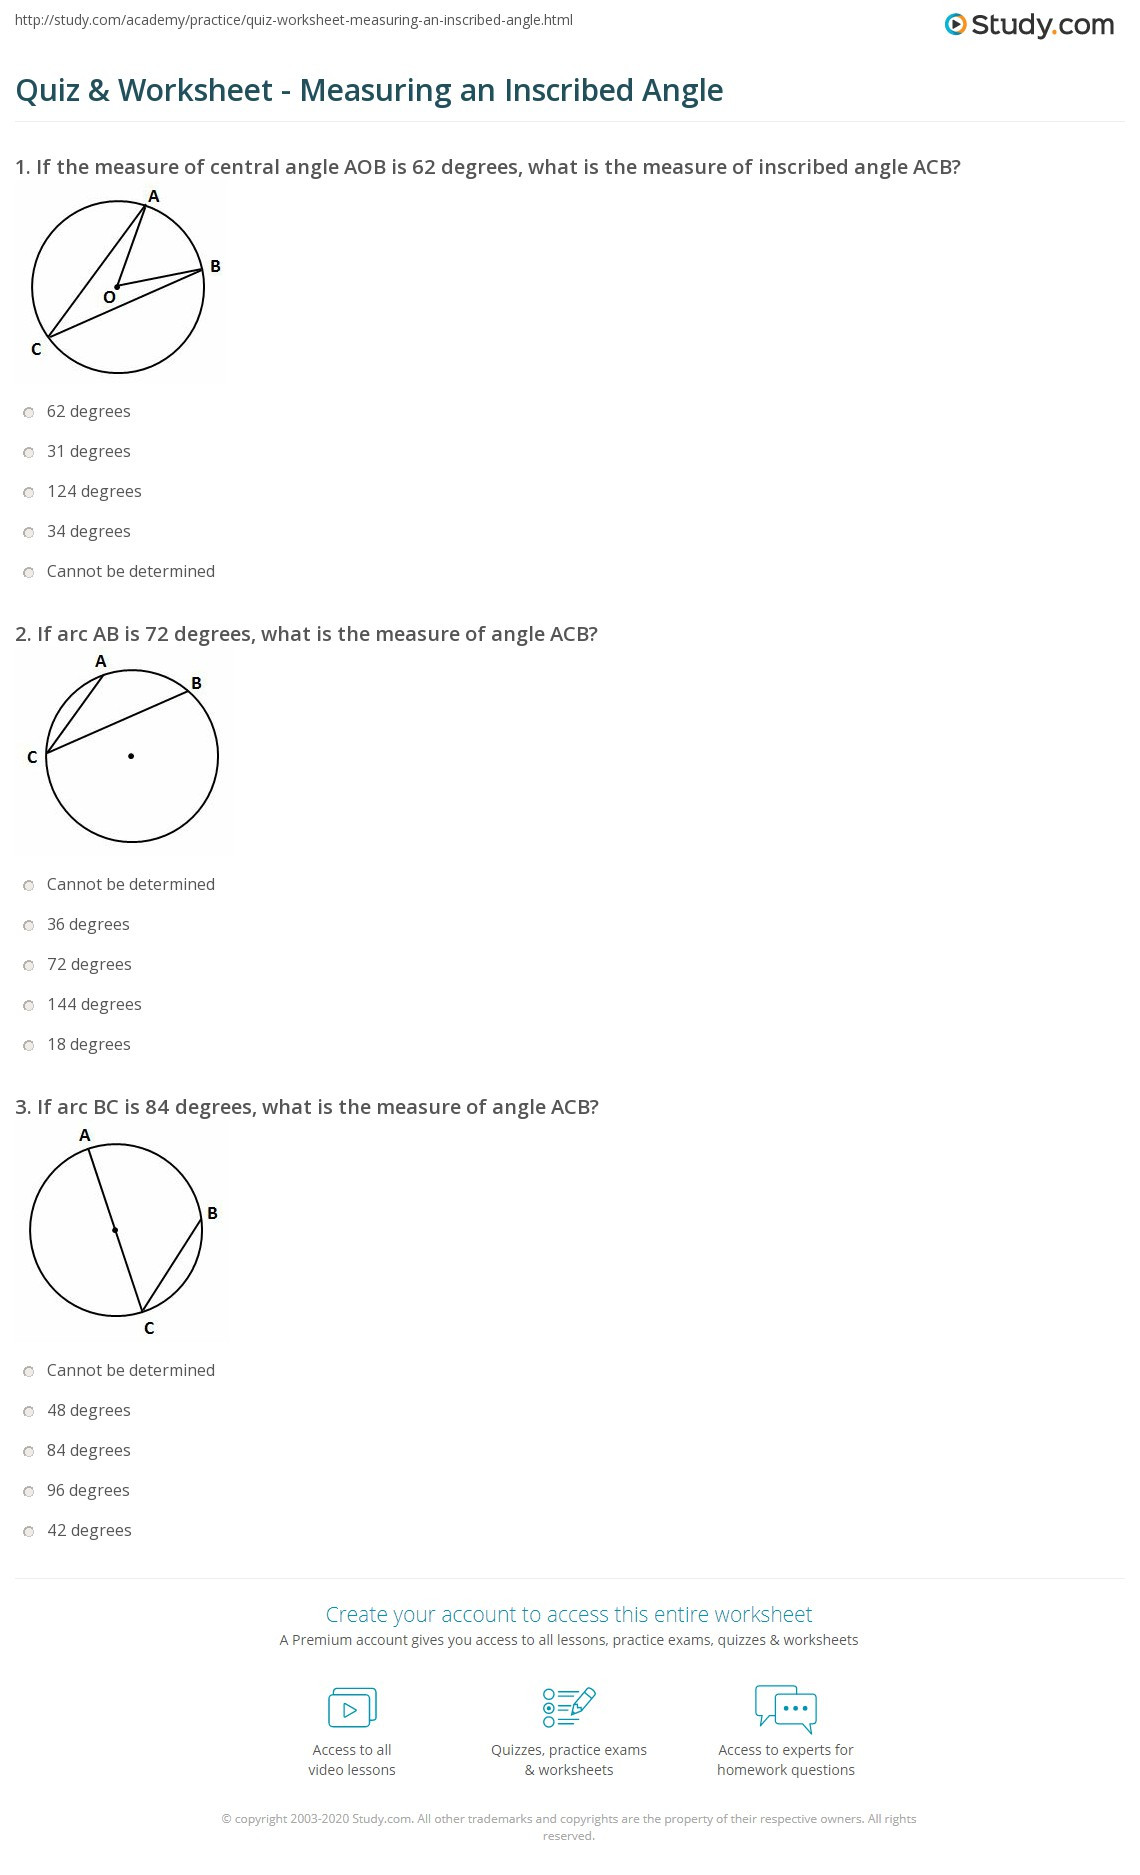 Central and Inscribed Angle Worksheet Quiz &amp; Worksheet Measuring An Inscribed Angle